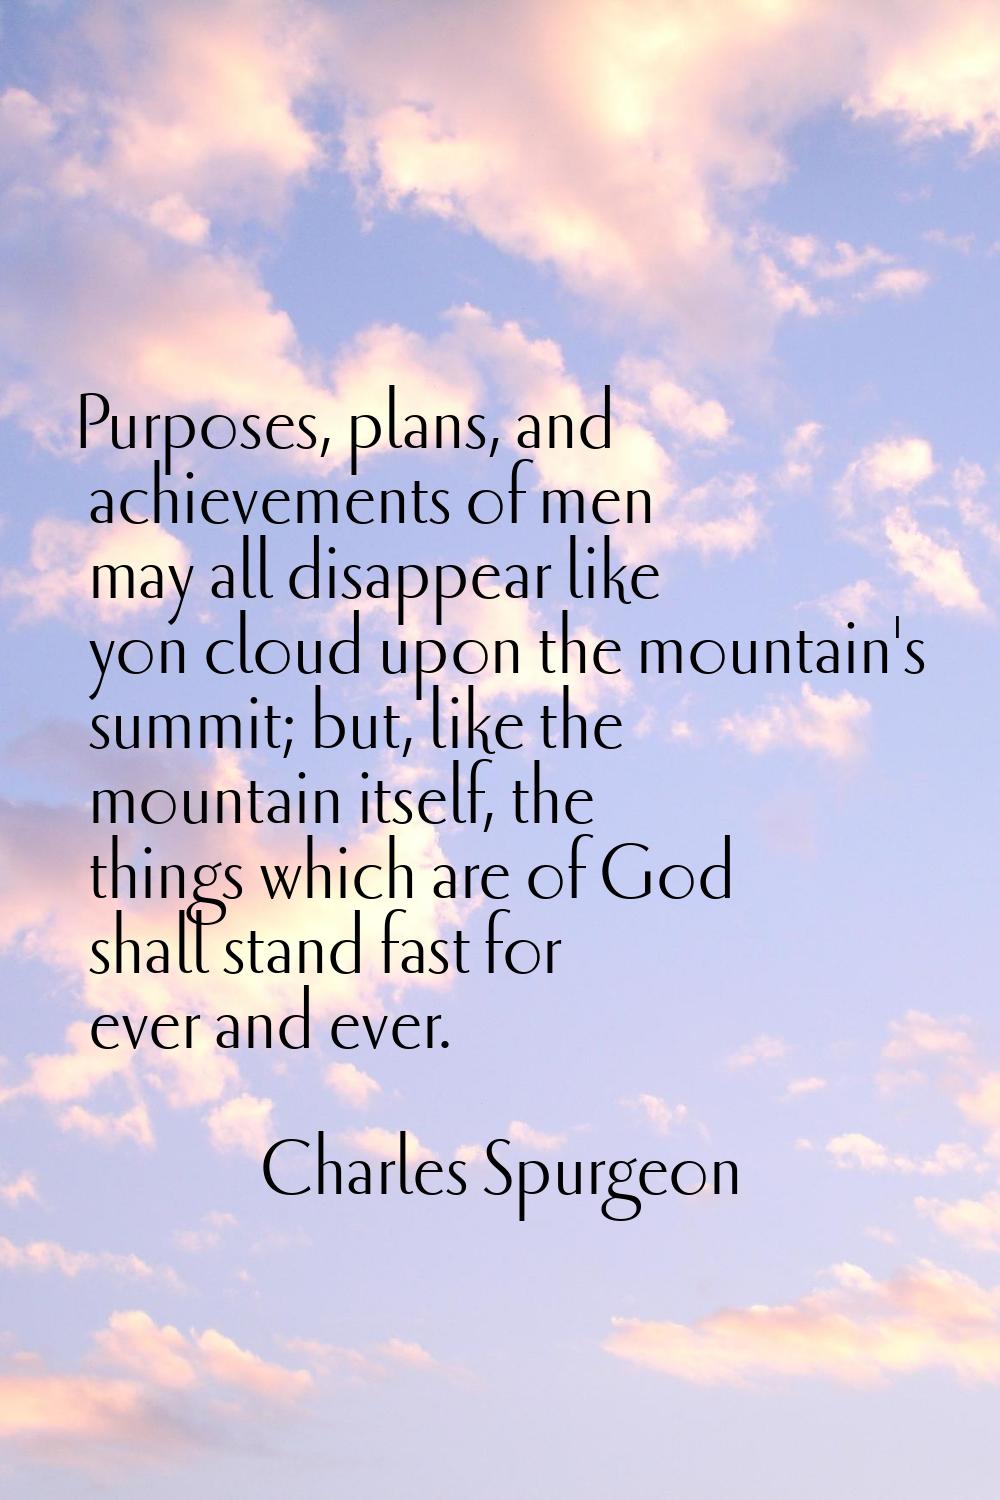 Purposes, plans, and achievements of men may all disappear like yon cloud upon the mountain's summi